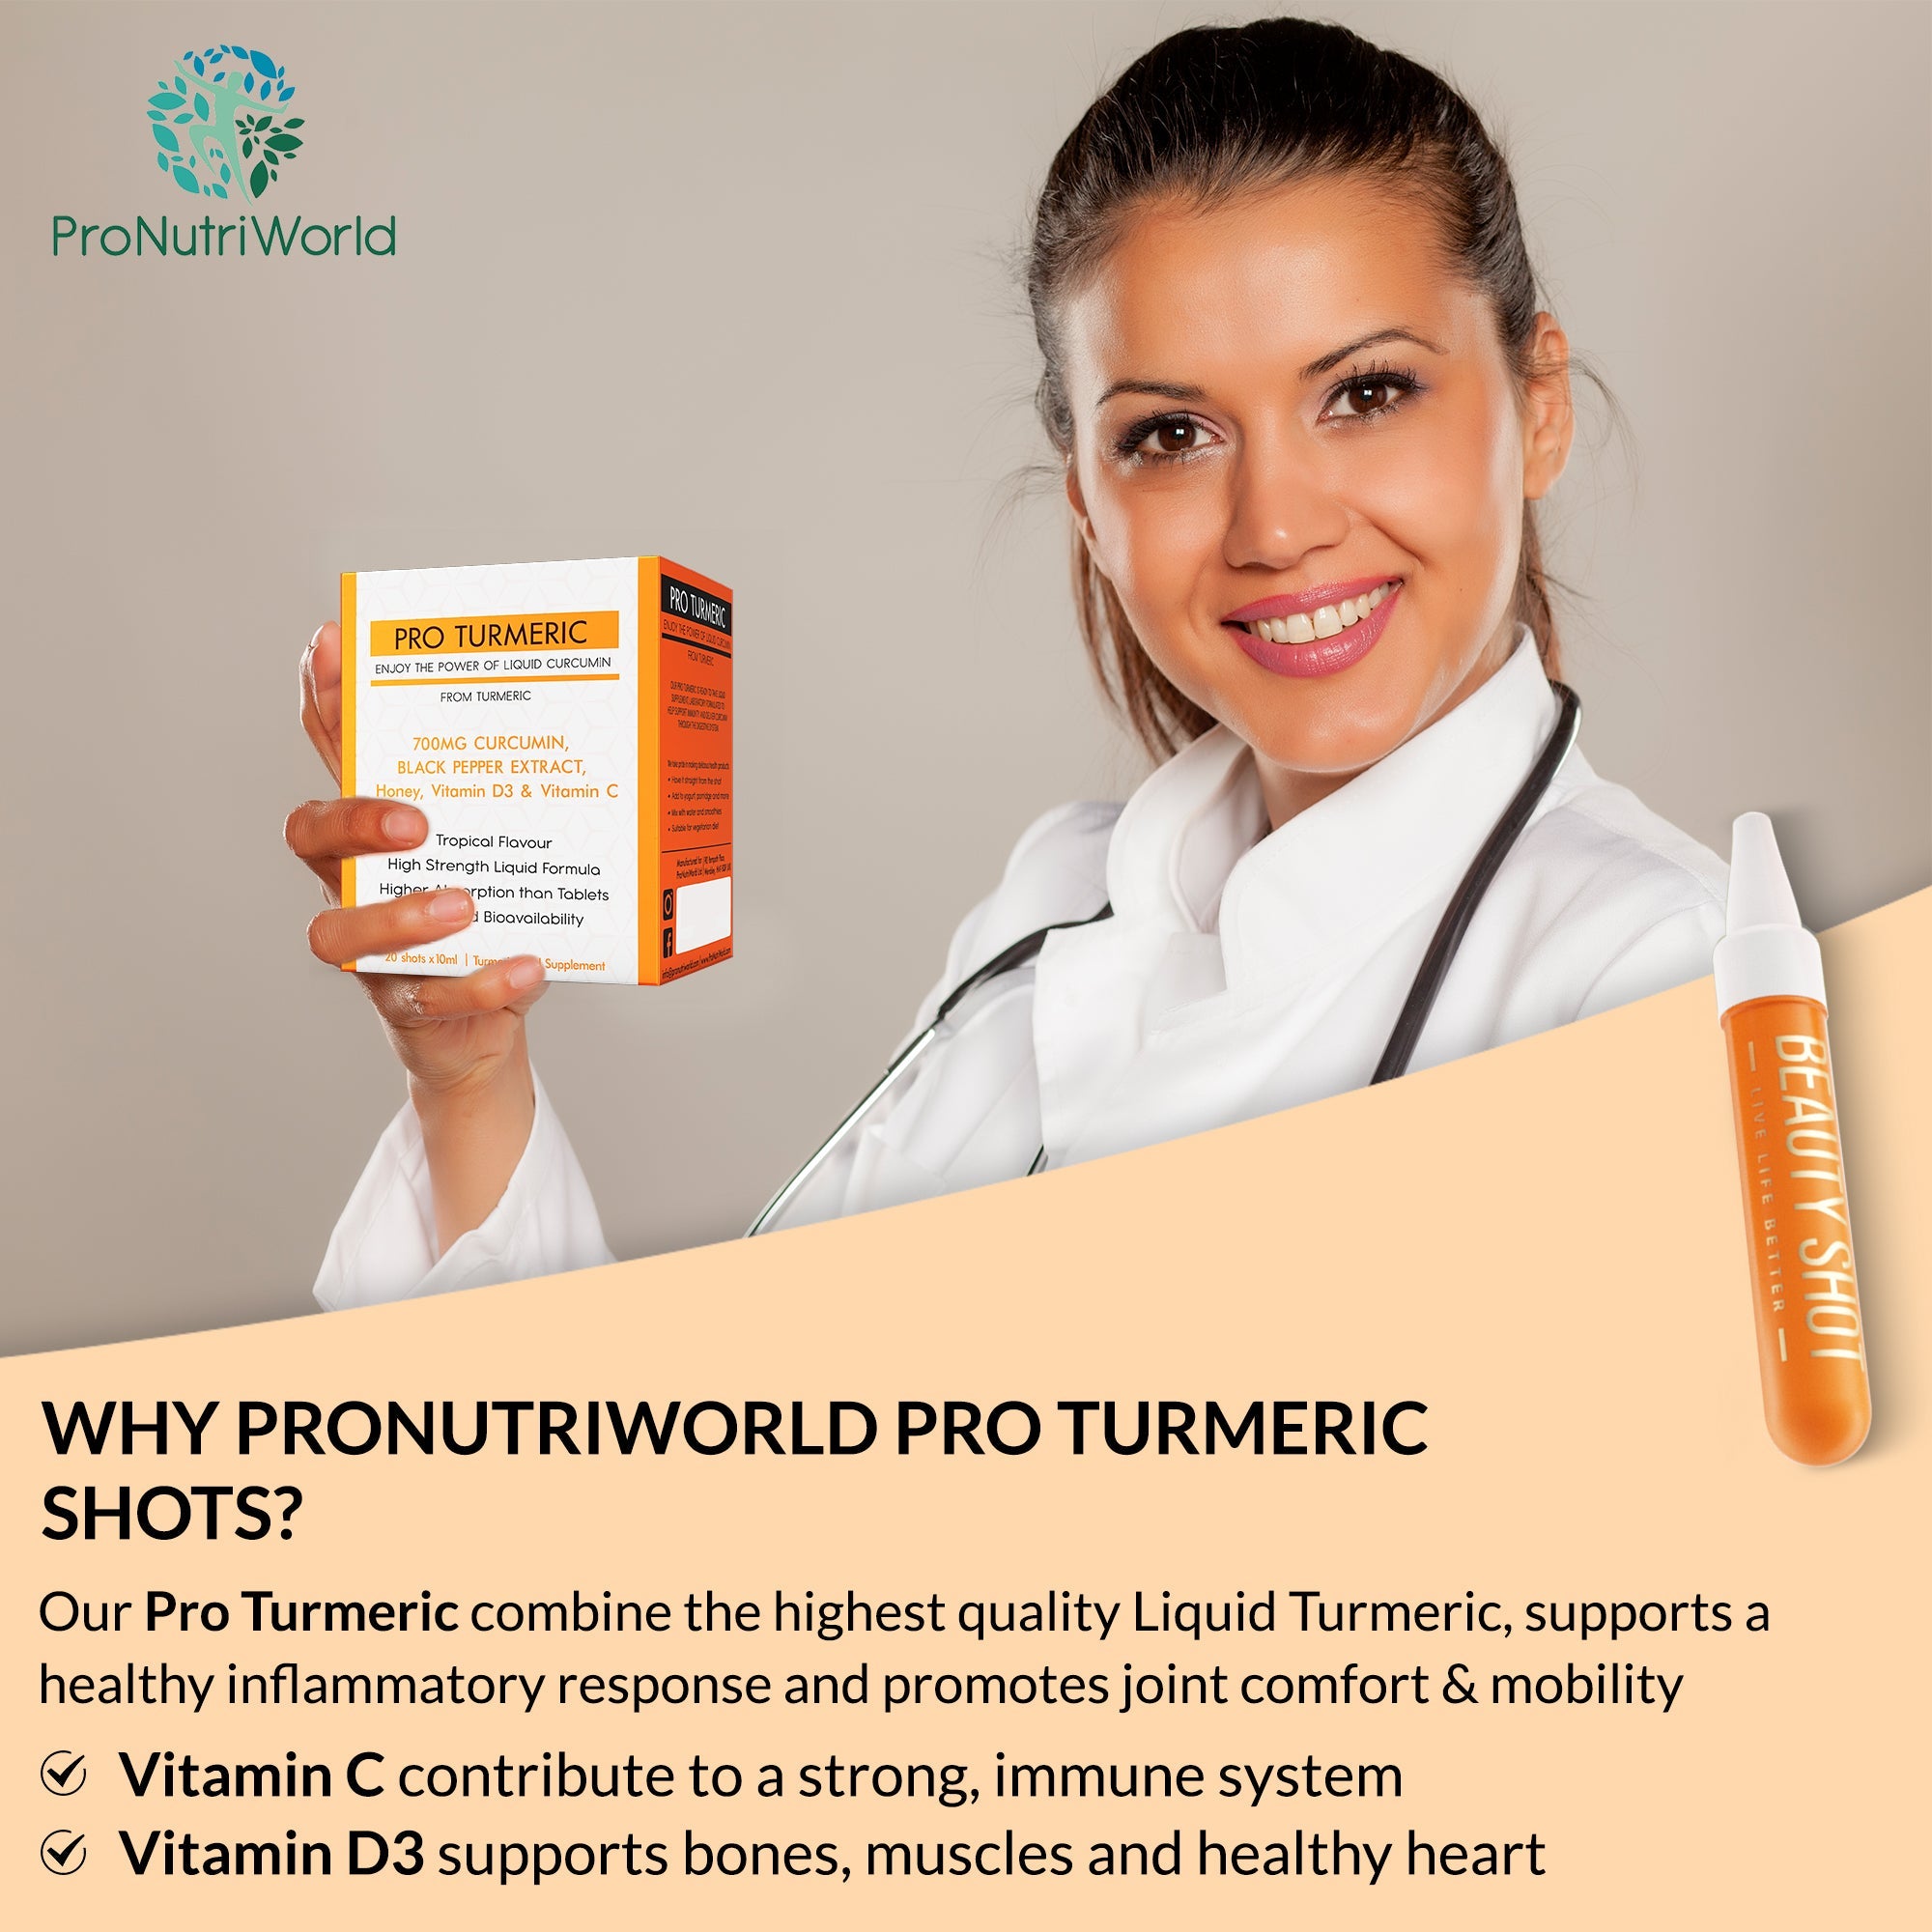 &lt;img src=&quot;pic.gif&quot; alt=&quot;Pro Turmeric is sugar free dairy free gluten free soy free and made using natural ingredients&quot; /&gt;